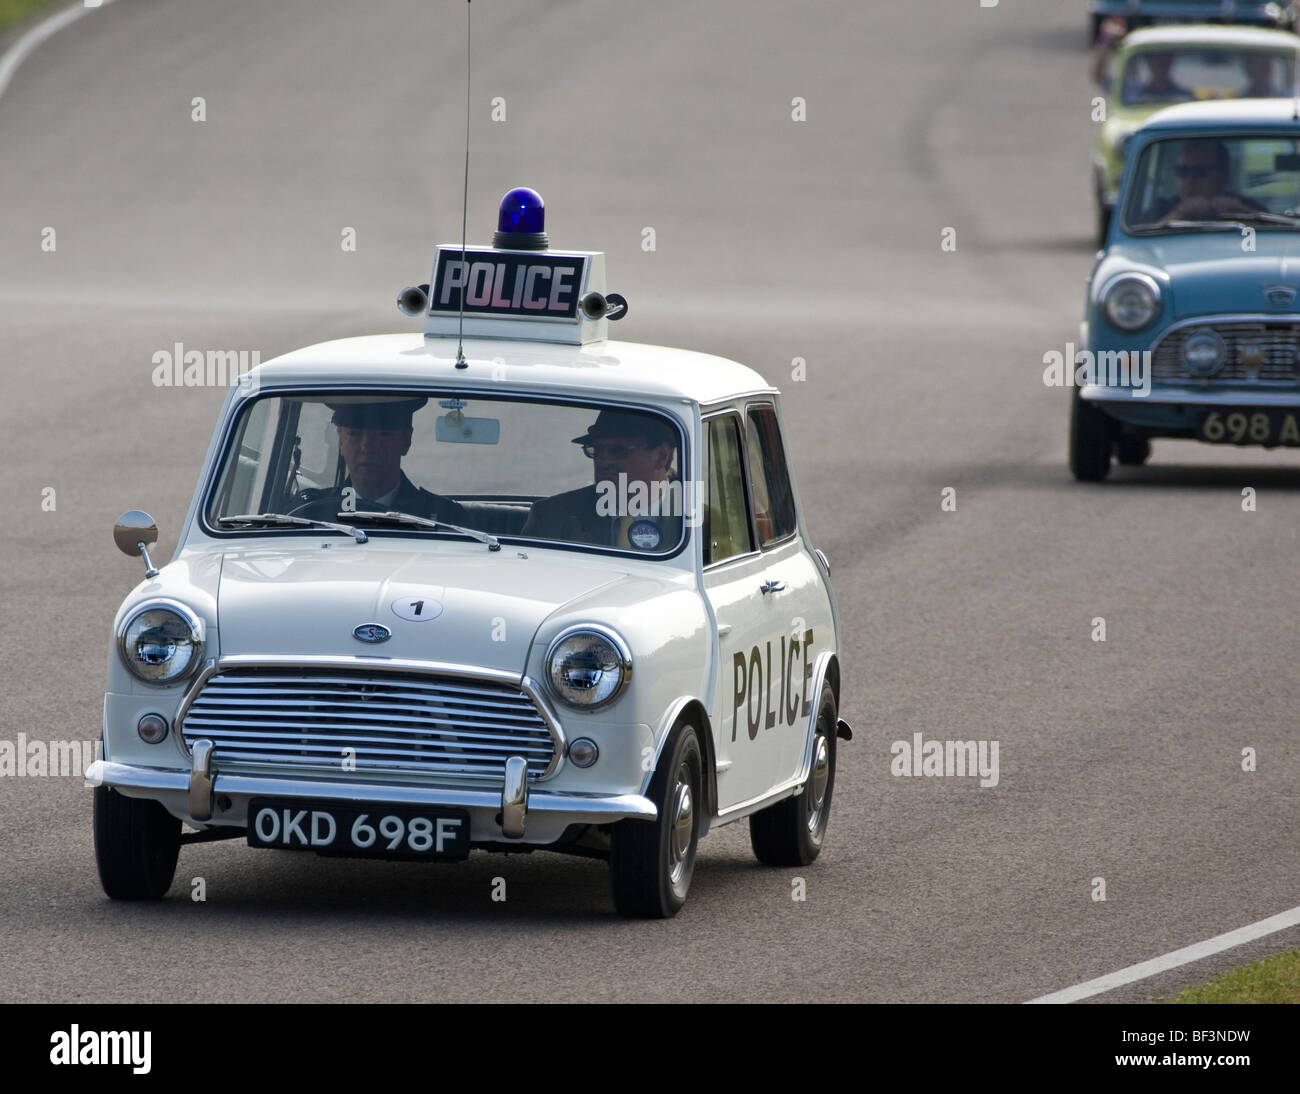 1968 Morris Mini Cooper S Police car at the 2009 Goodwood Revival meeting, Sussex, UK. Stock Photo